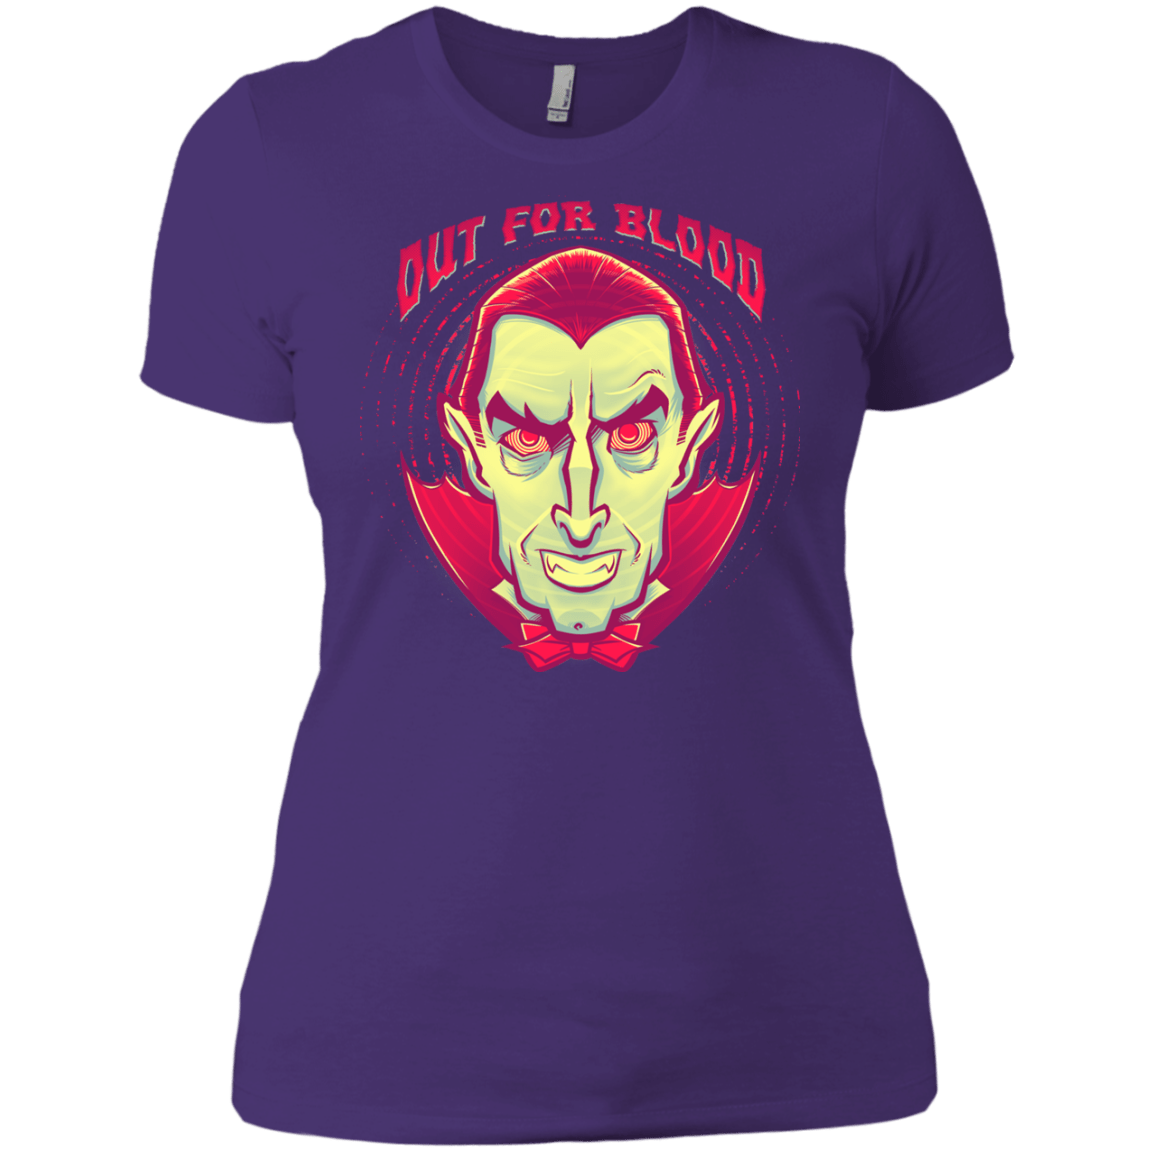 T-Shirts Purple / X-Small OUT FOR BLOOD Women's Premium T-Shirt